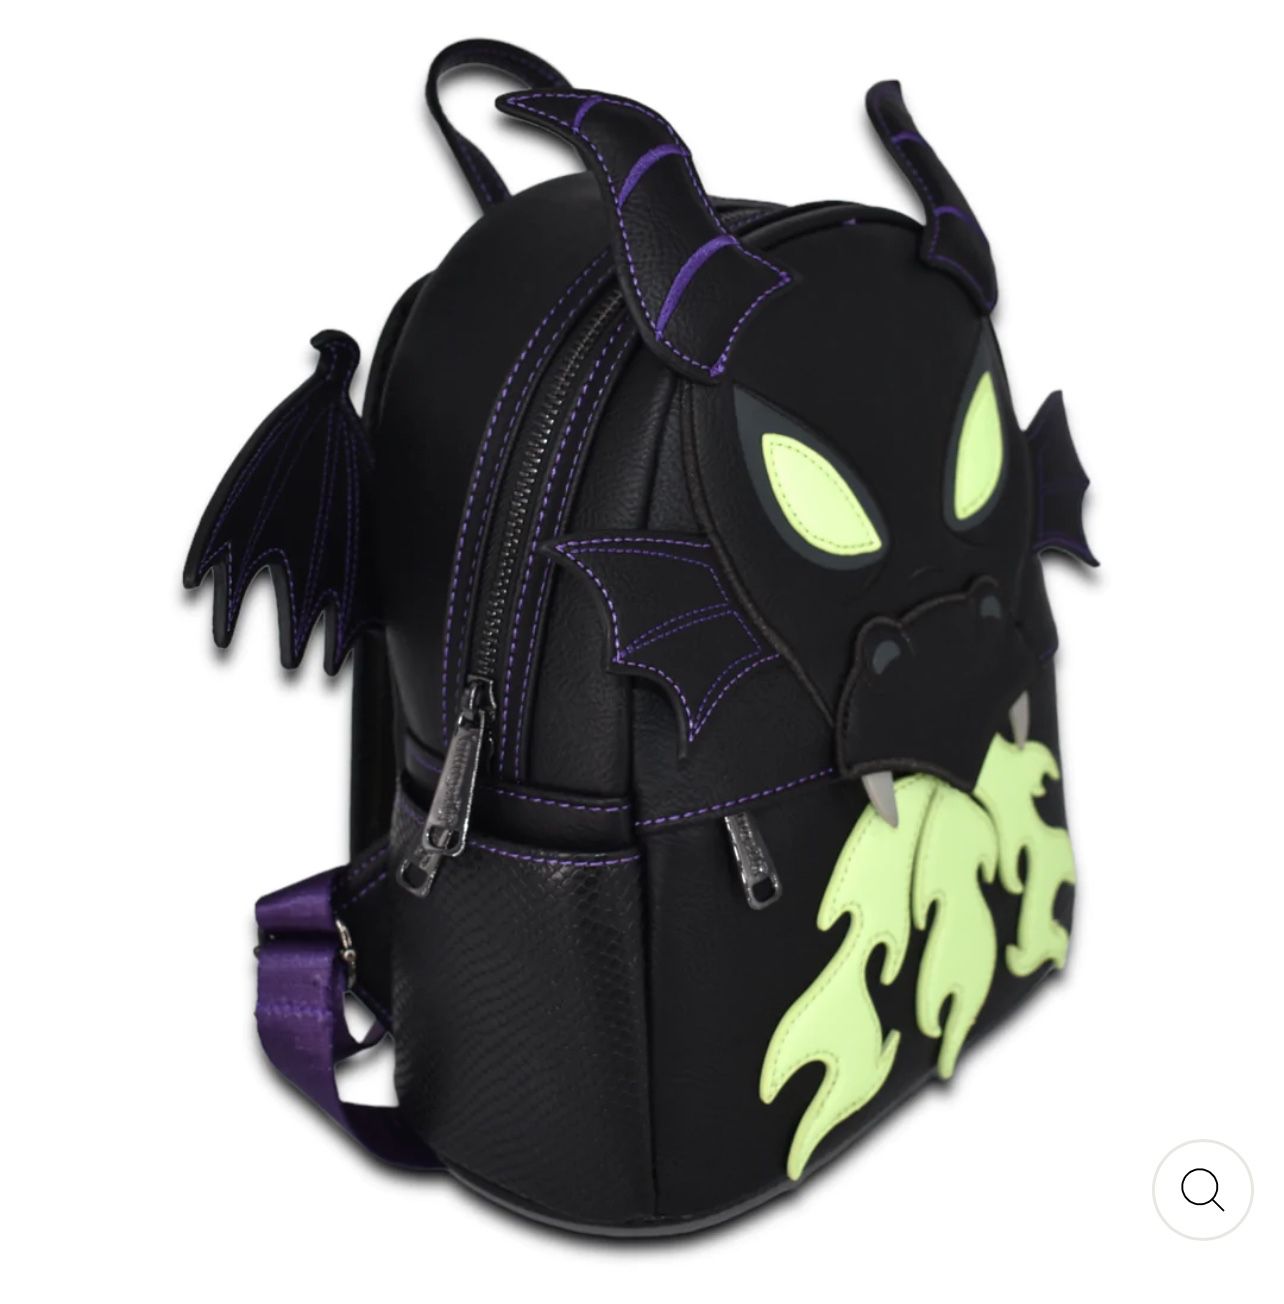 Maleficent Dragon Cosplay Loungefly for Sale in Oxnard, CA - OfferUp